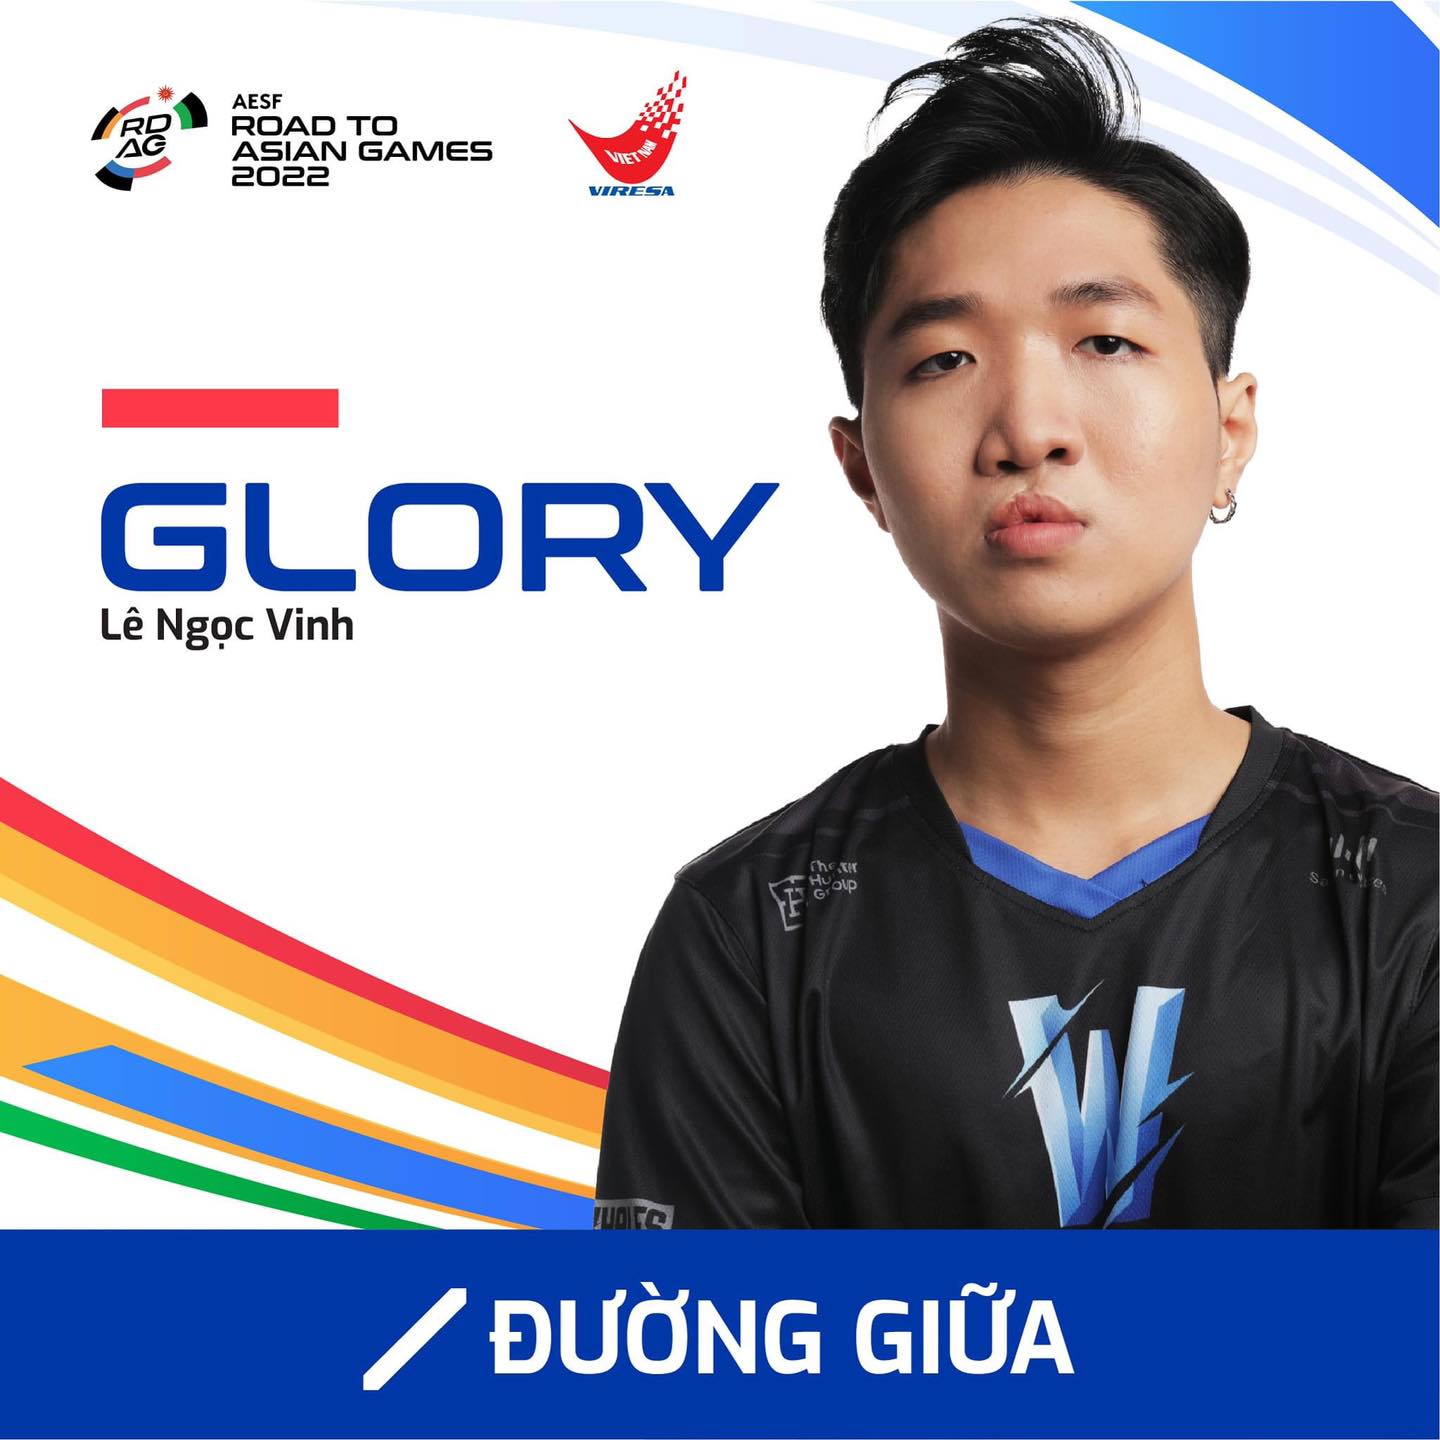 Glory was chosen as the mid laner of the Vietnamese national team to compete at the 2022 Asian Games